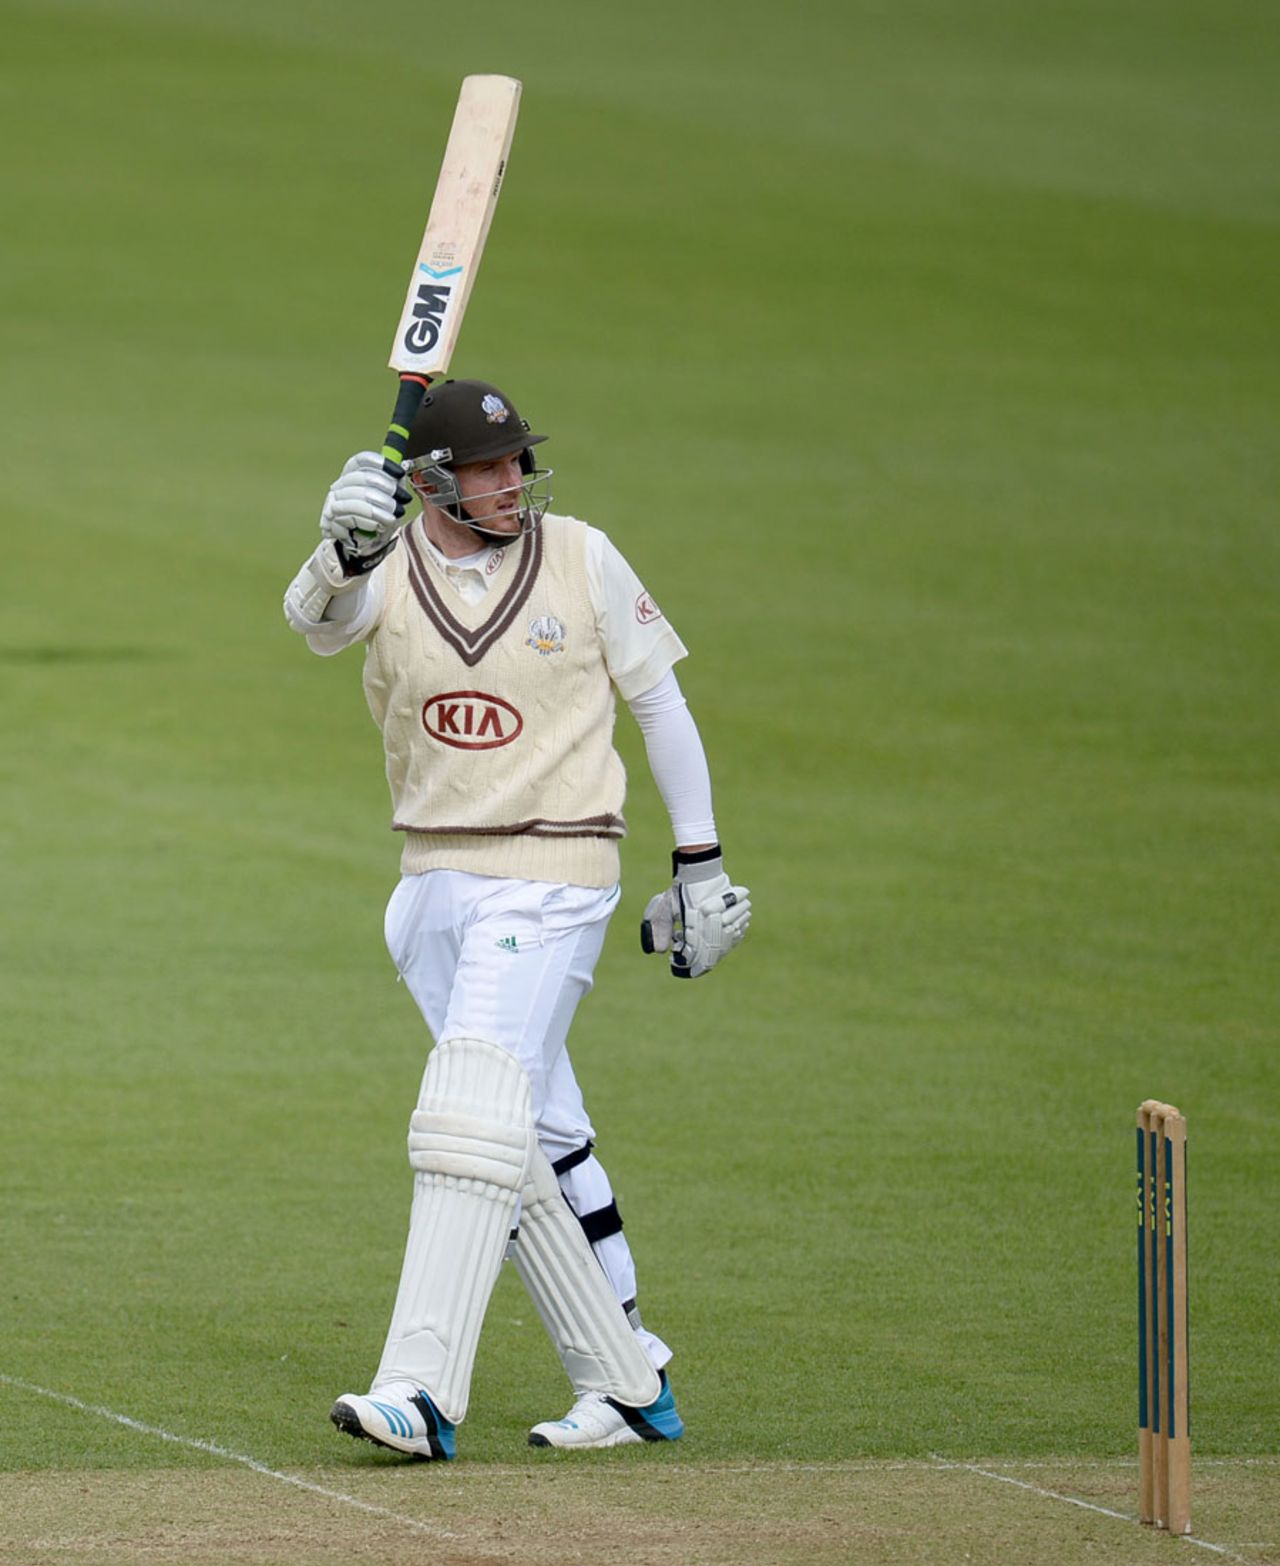 Graeme Smith led the way with a half-century, Surrey v Essex, County Championship, Division Two, The Oval, 3rd day, April 22, 2014